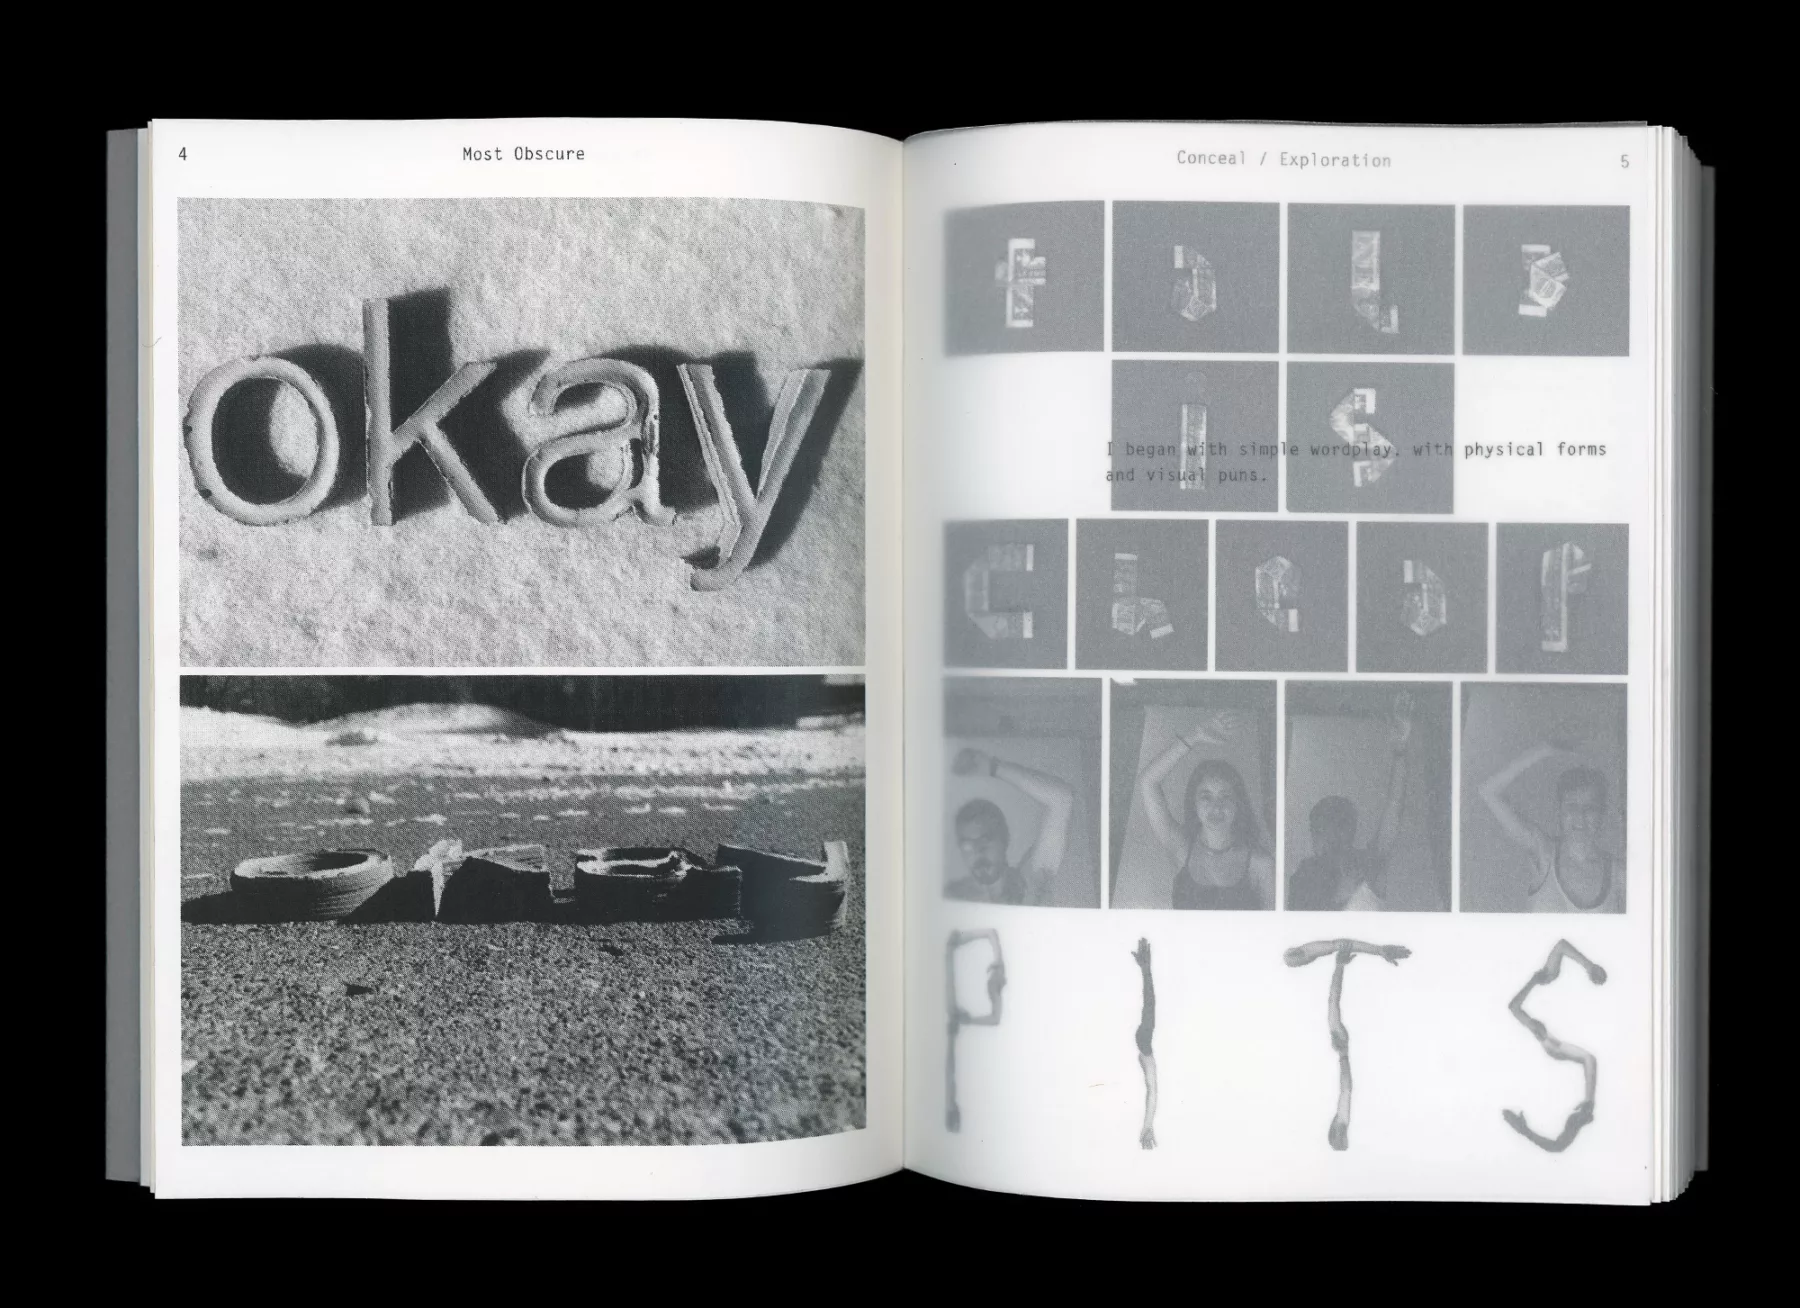 Spread of 'Most Obscure' book showing various letters made of concrete, dollar bills, and arms.